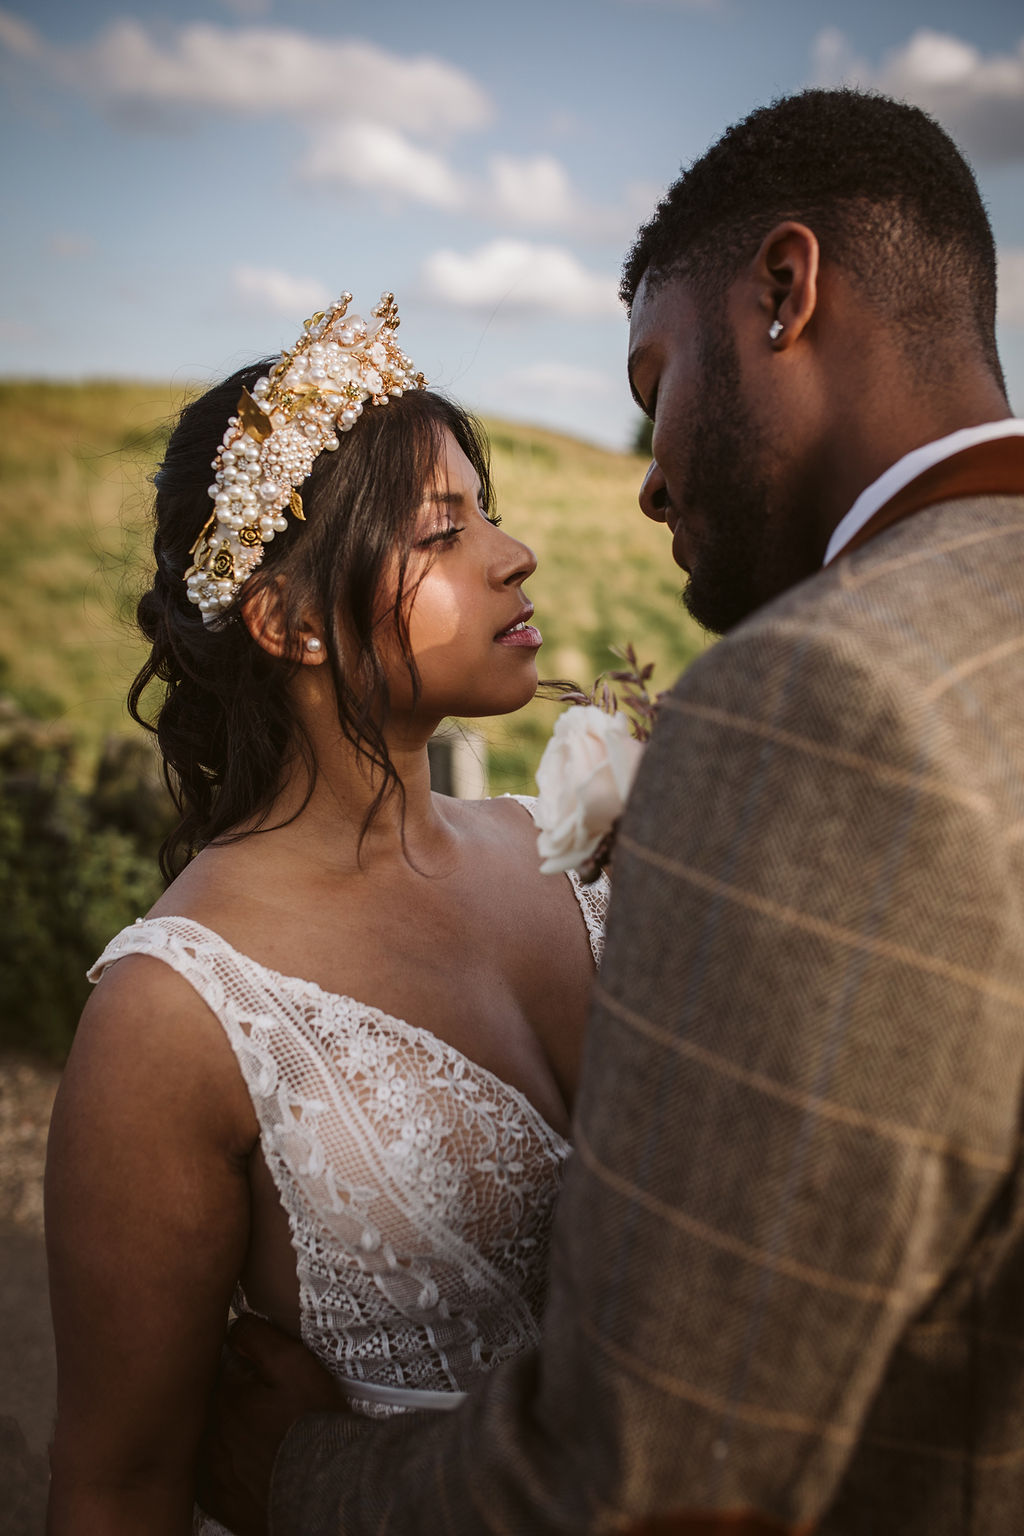 Peak District elopement inspiration captured by Hannah Brooke Photography